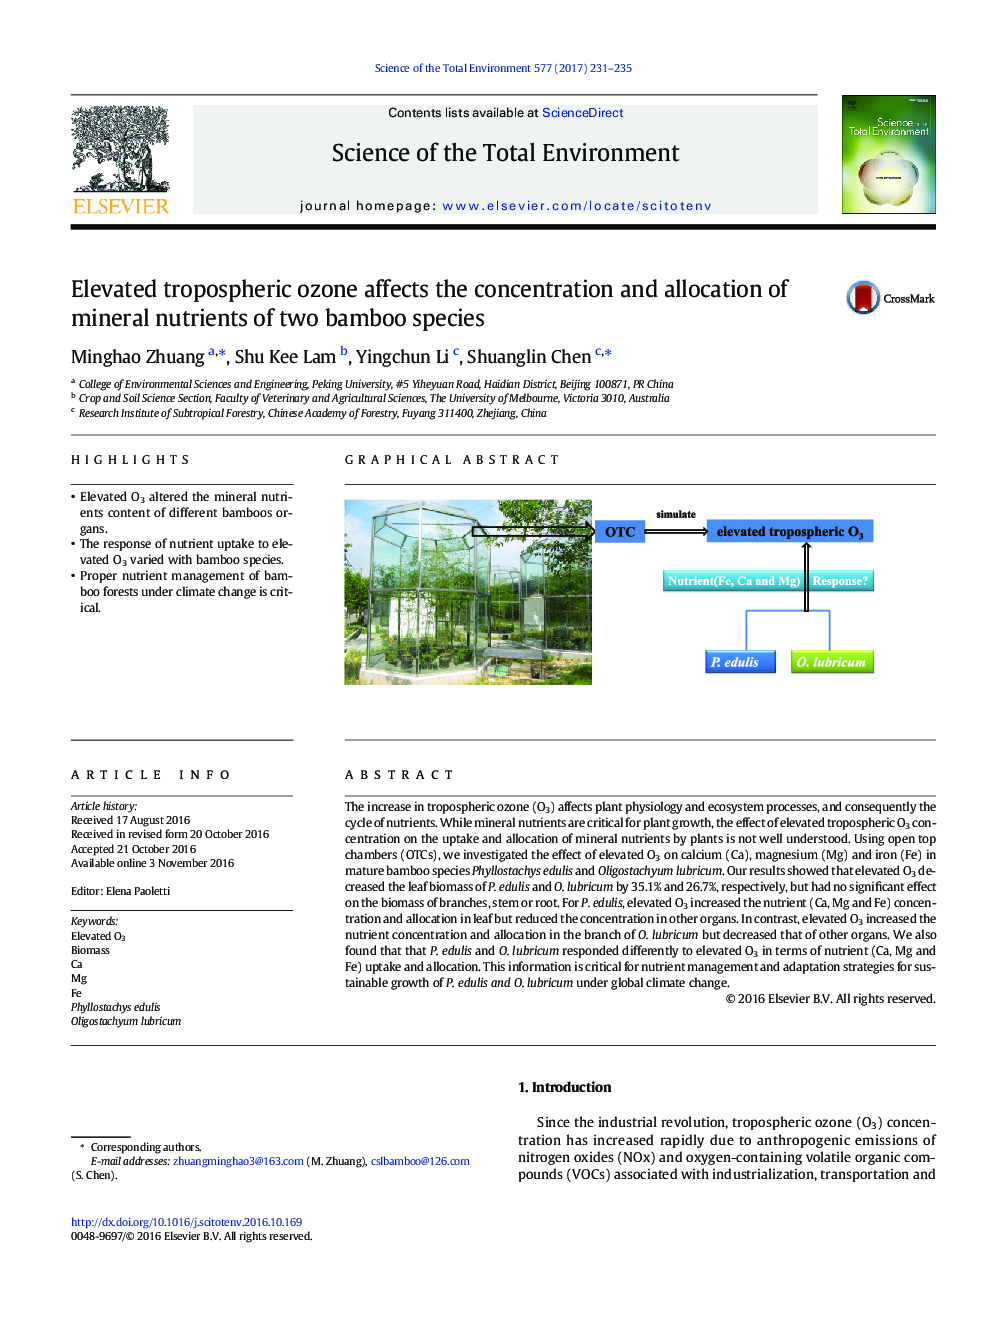 Elevated tropospheric ozone affects the concentration and allocation of mineral nutrients of two bamboo species